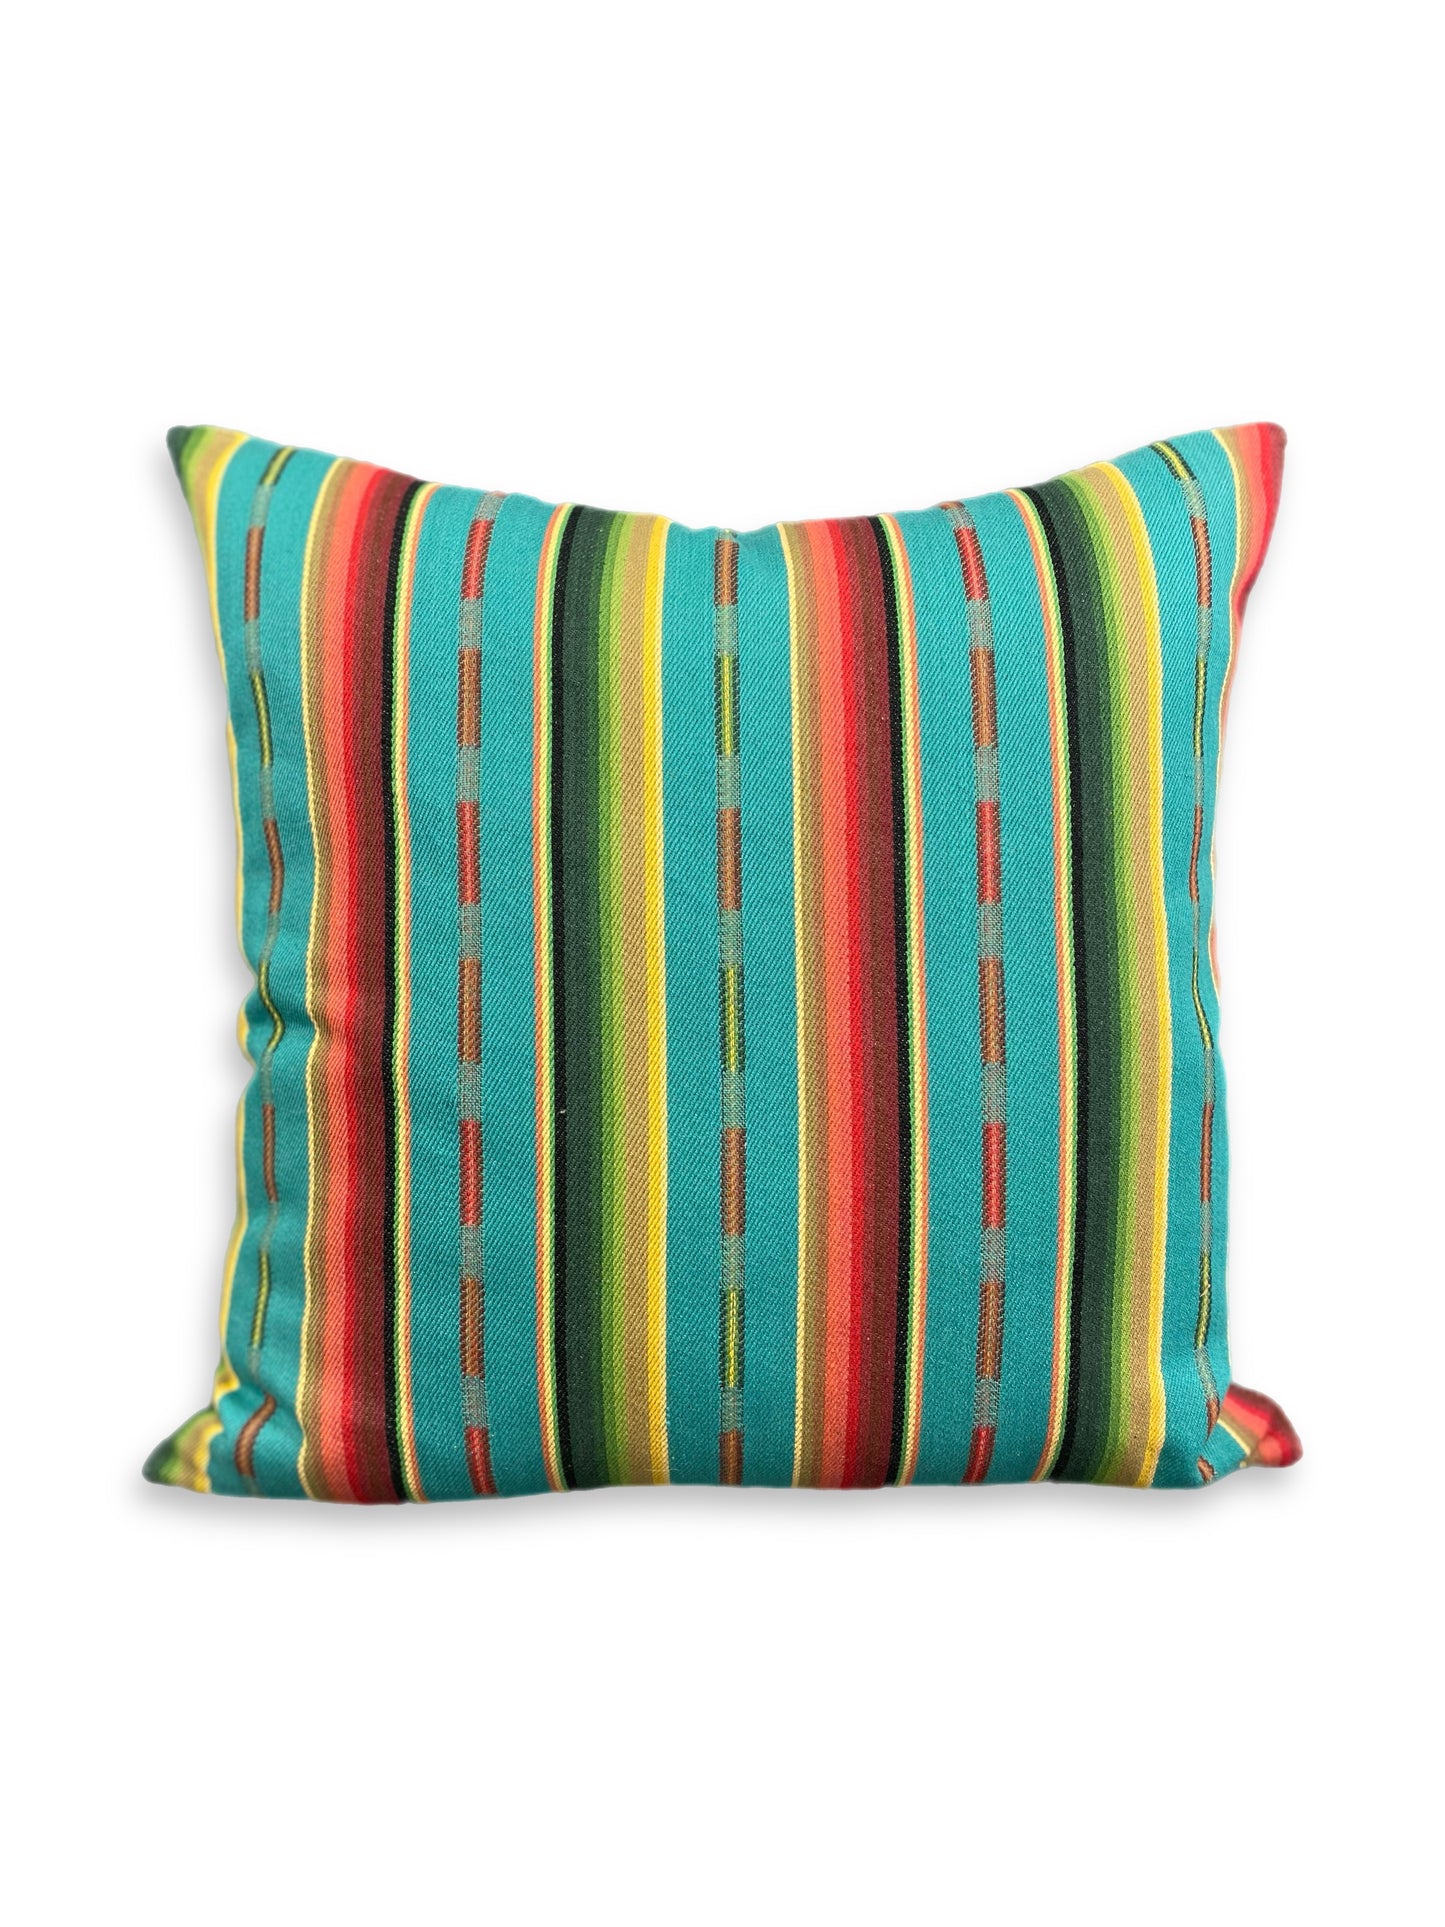 Luxury Pillow -  24" x 24" - Native-Turquoise ; beautiful woven stripes of turquoise, black, oranges, yellows, greens, blues, and reds